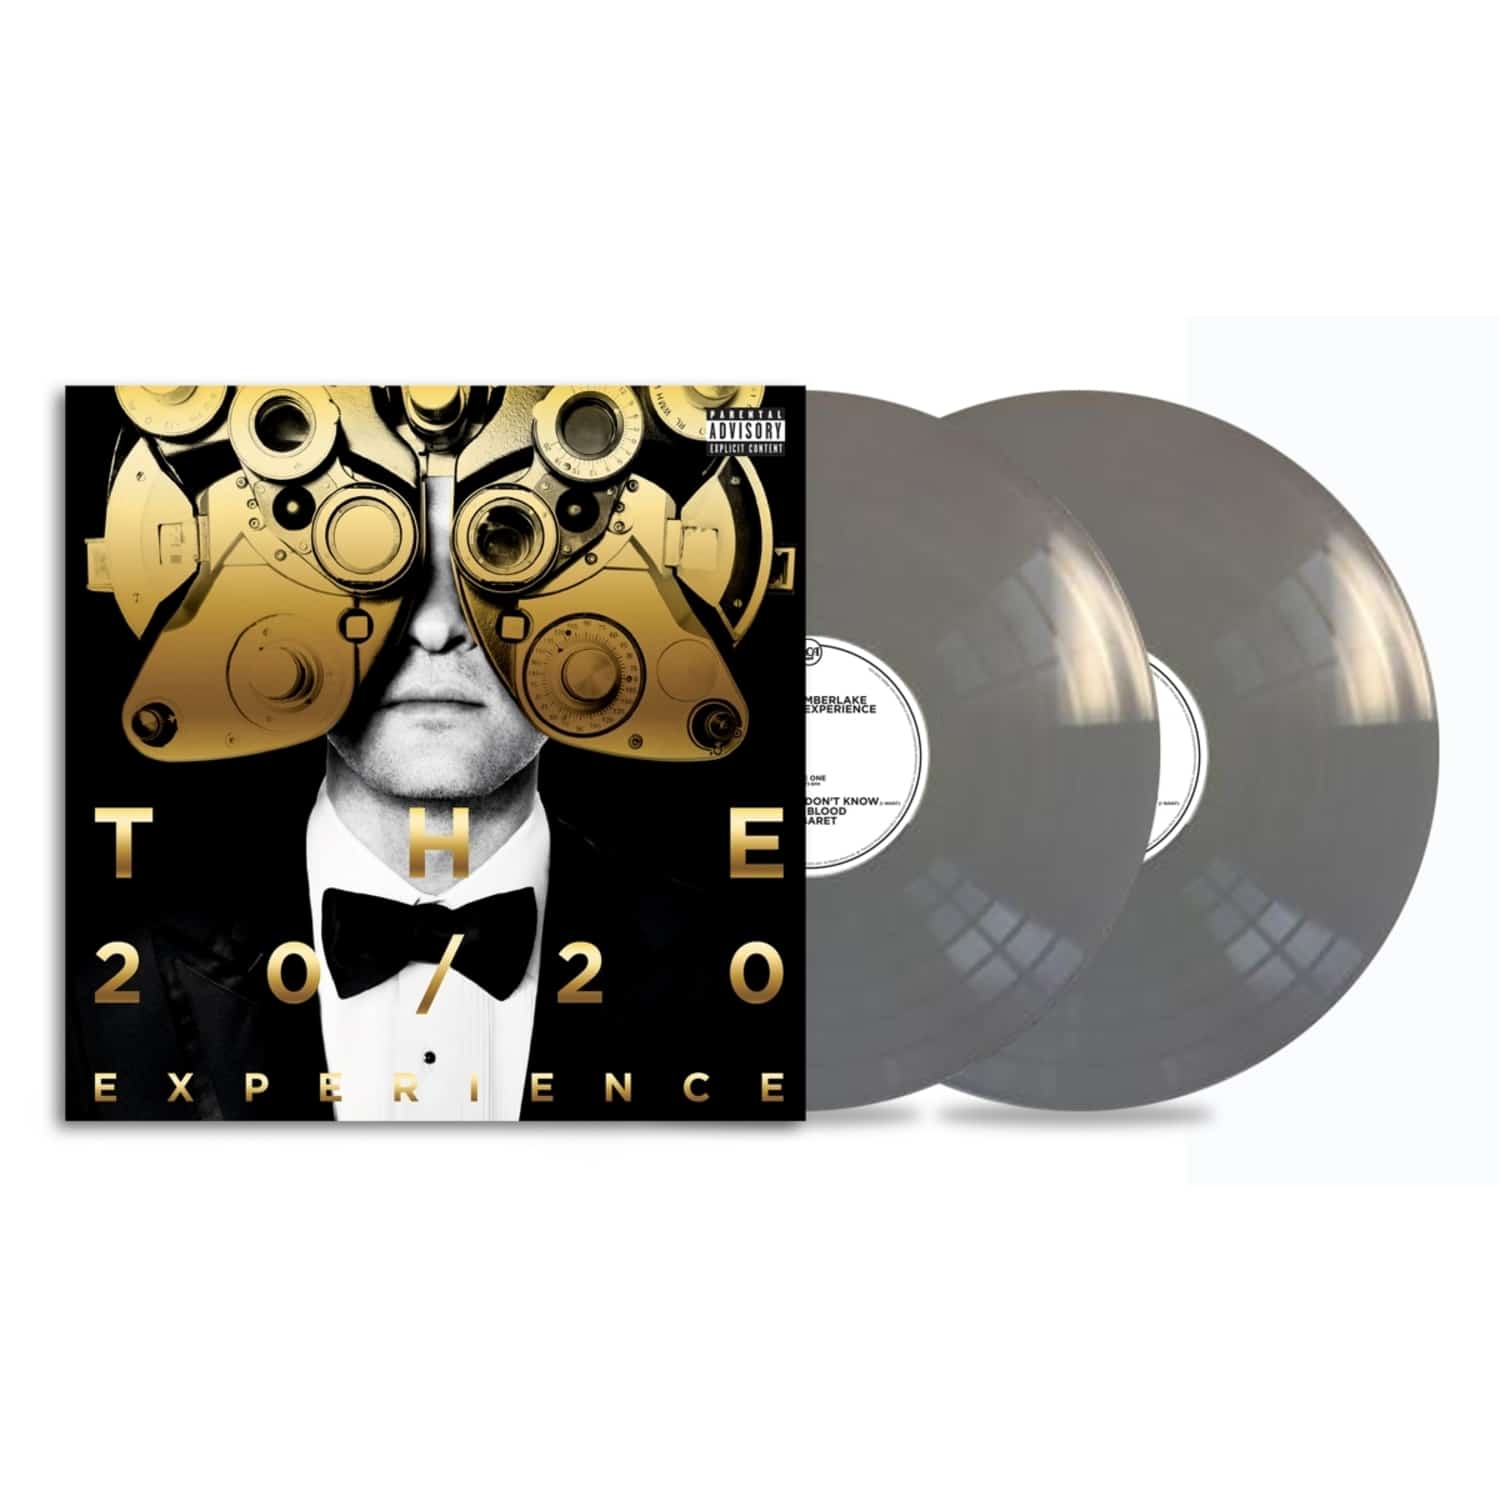 Justin Timberlake - THE 20 / 20 EXPERIENCE - 2 OF 2 / SILVER VINYL 